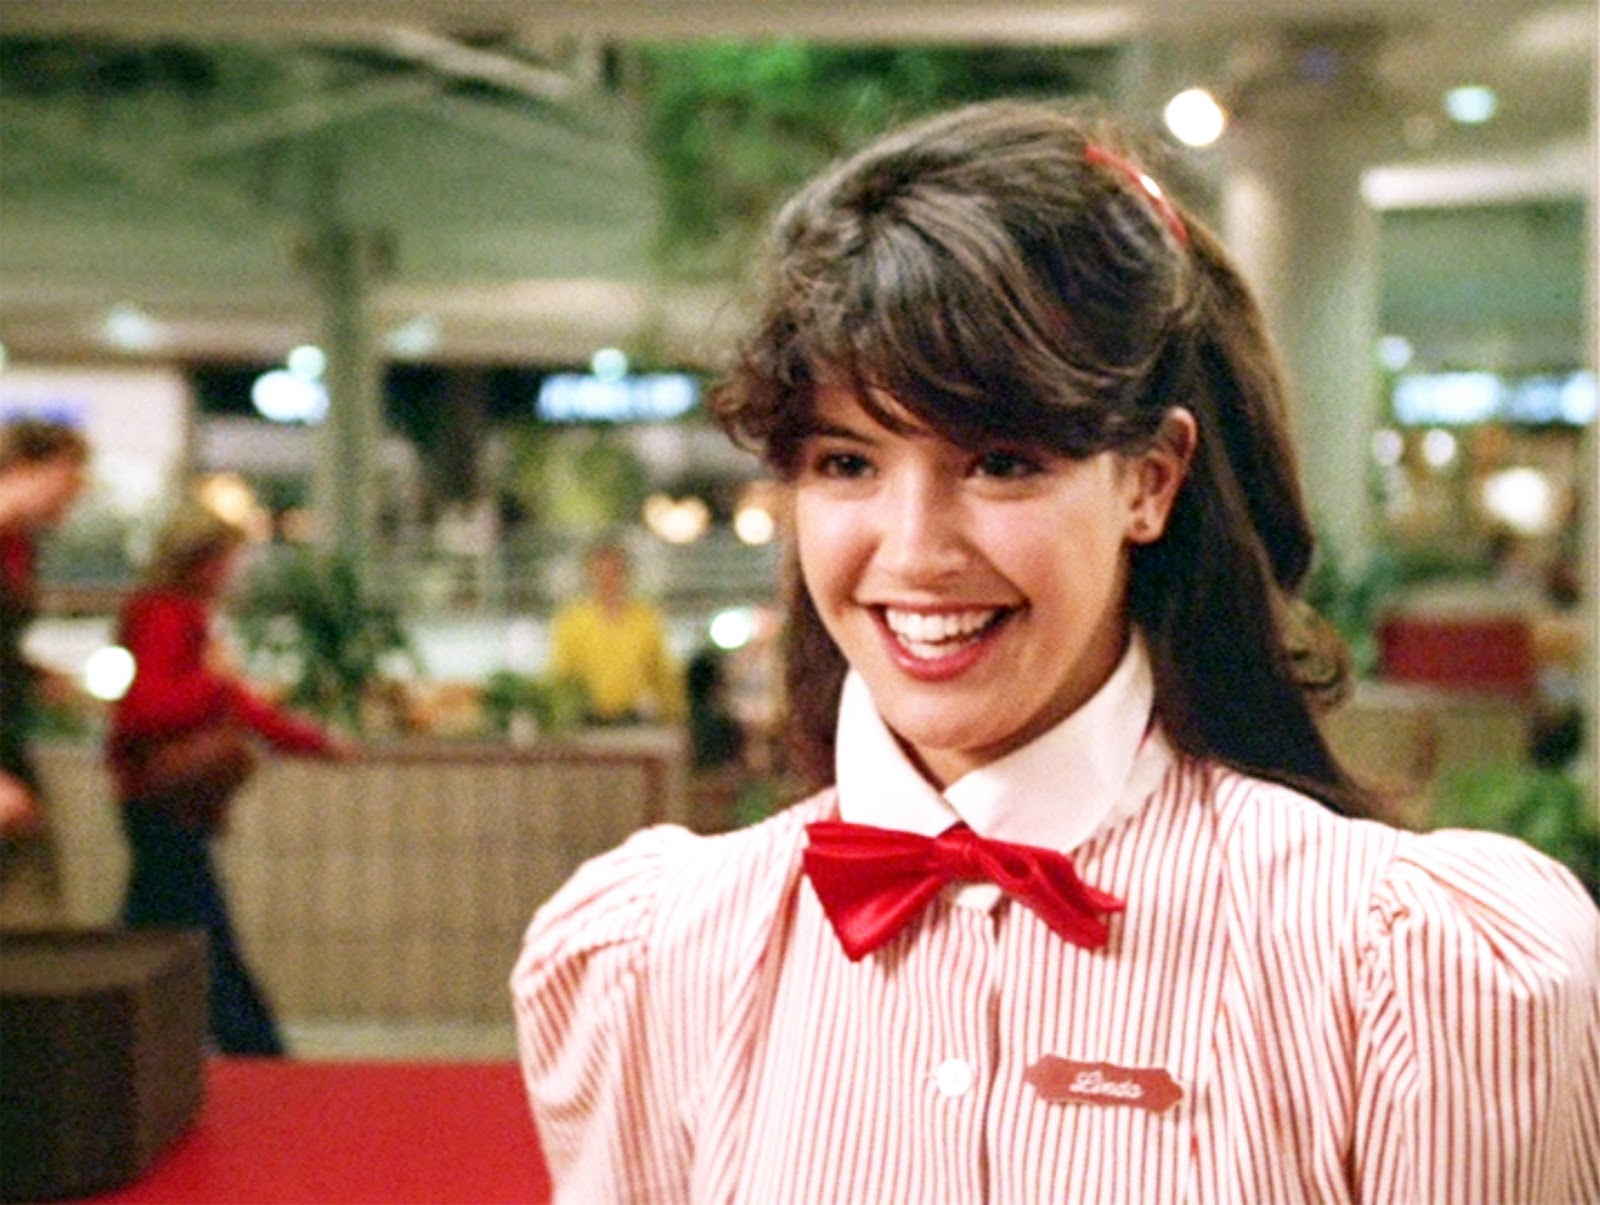 ‘Fast Times at Ridgemont High’: The Confidence and Wisdom of Linda Barrett